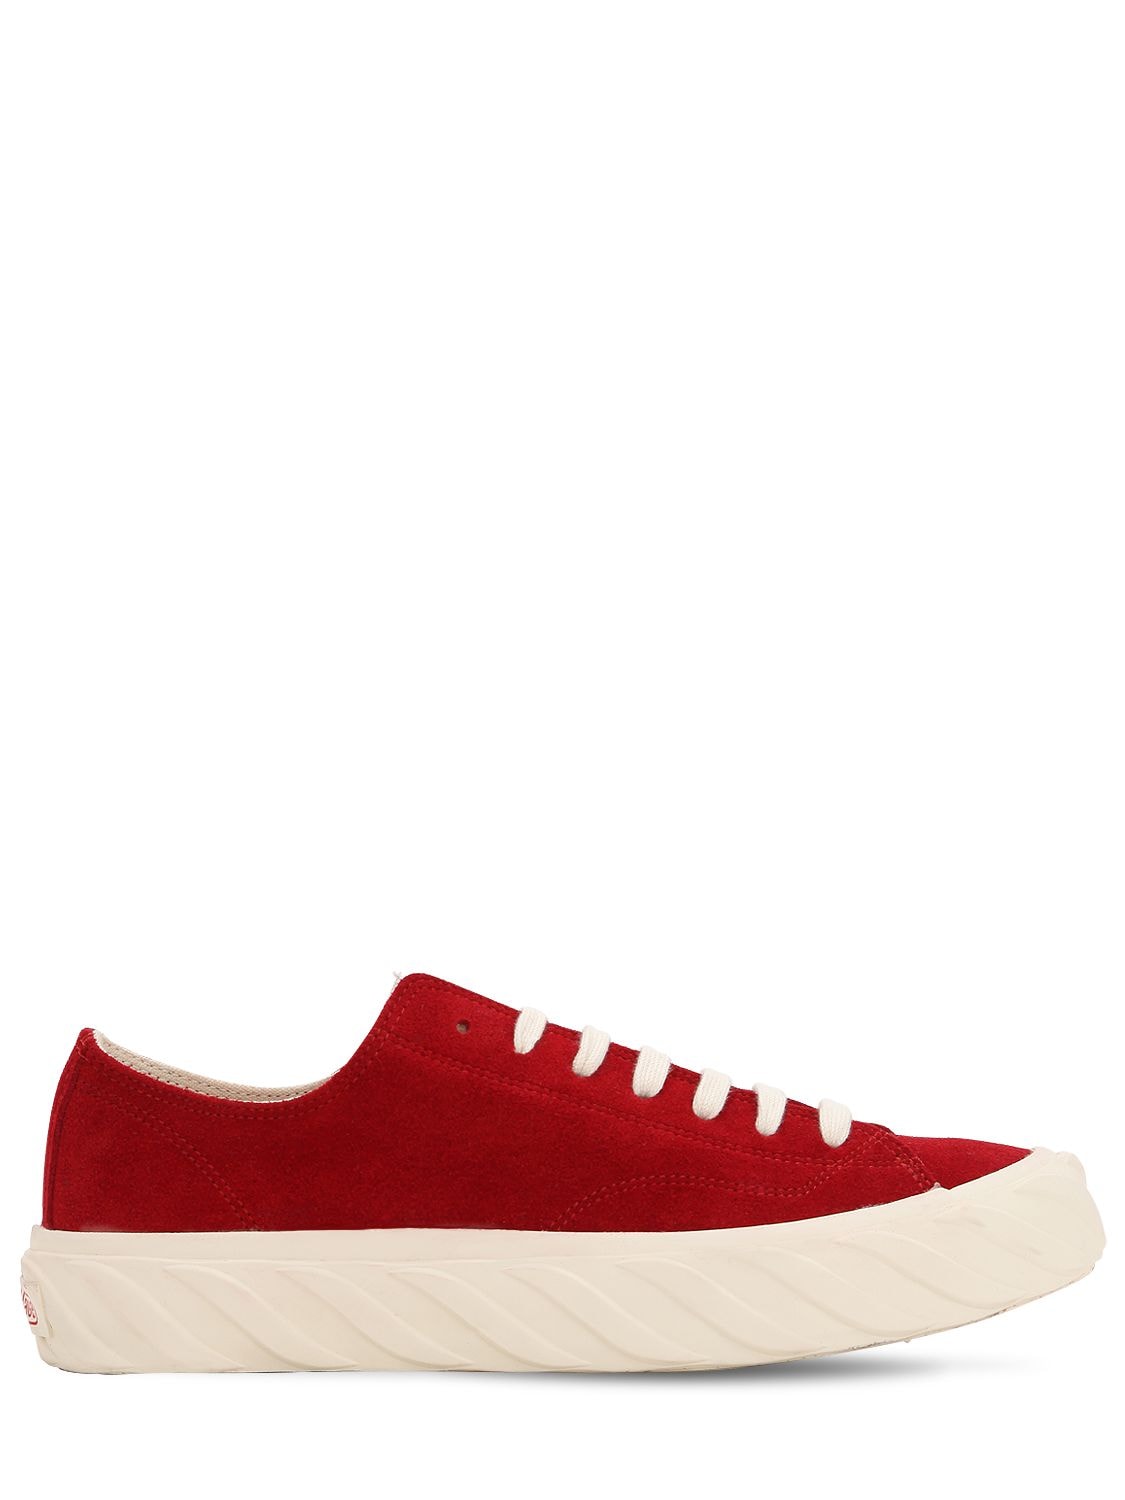 Age - Across To Genuine Era Cotton Canvas Trainers In Red